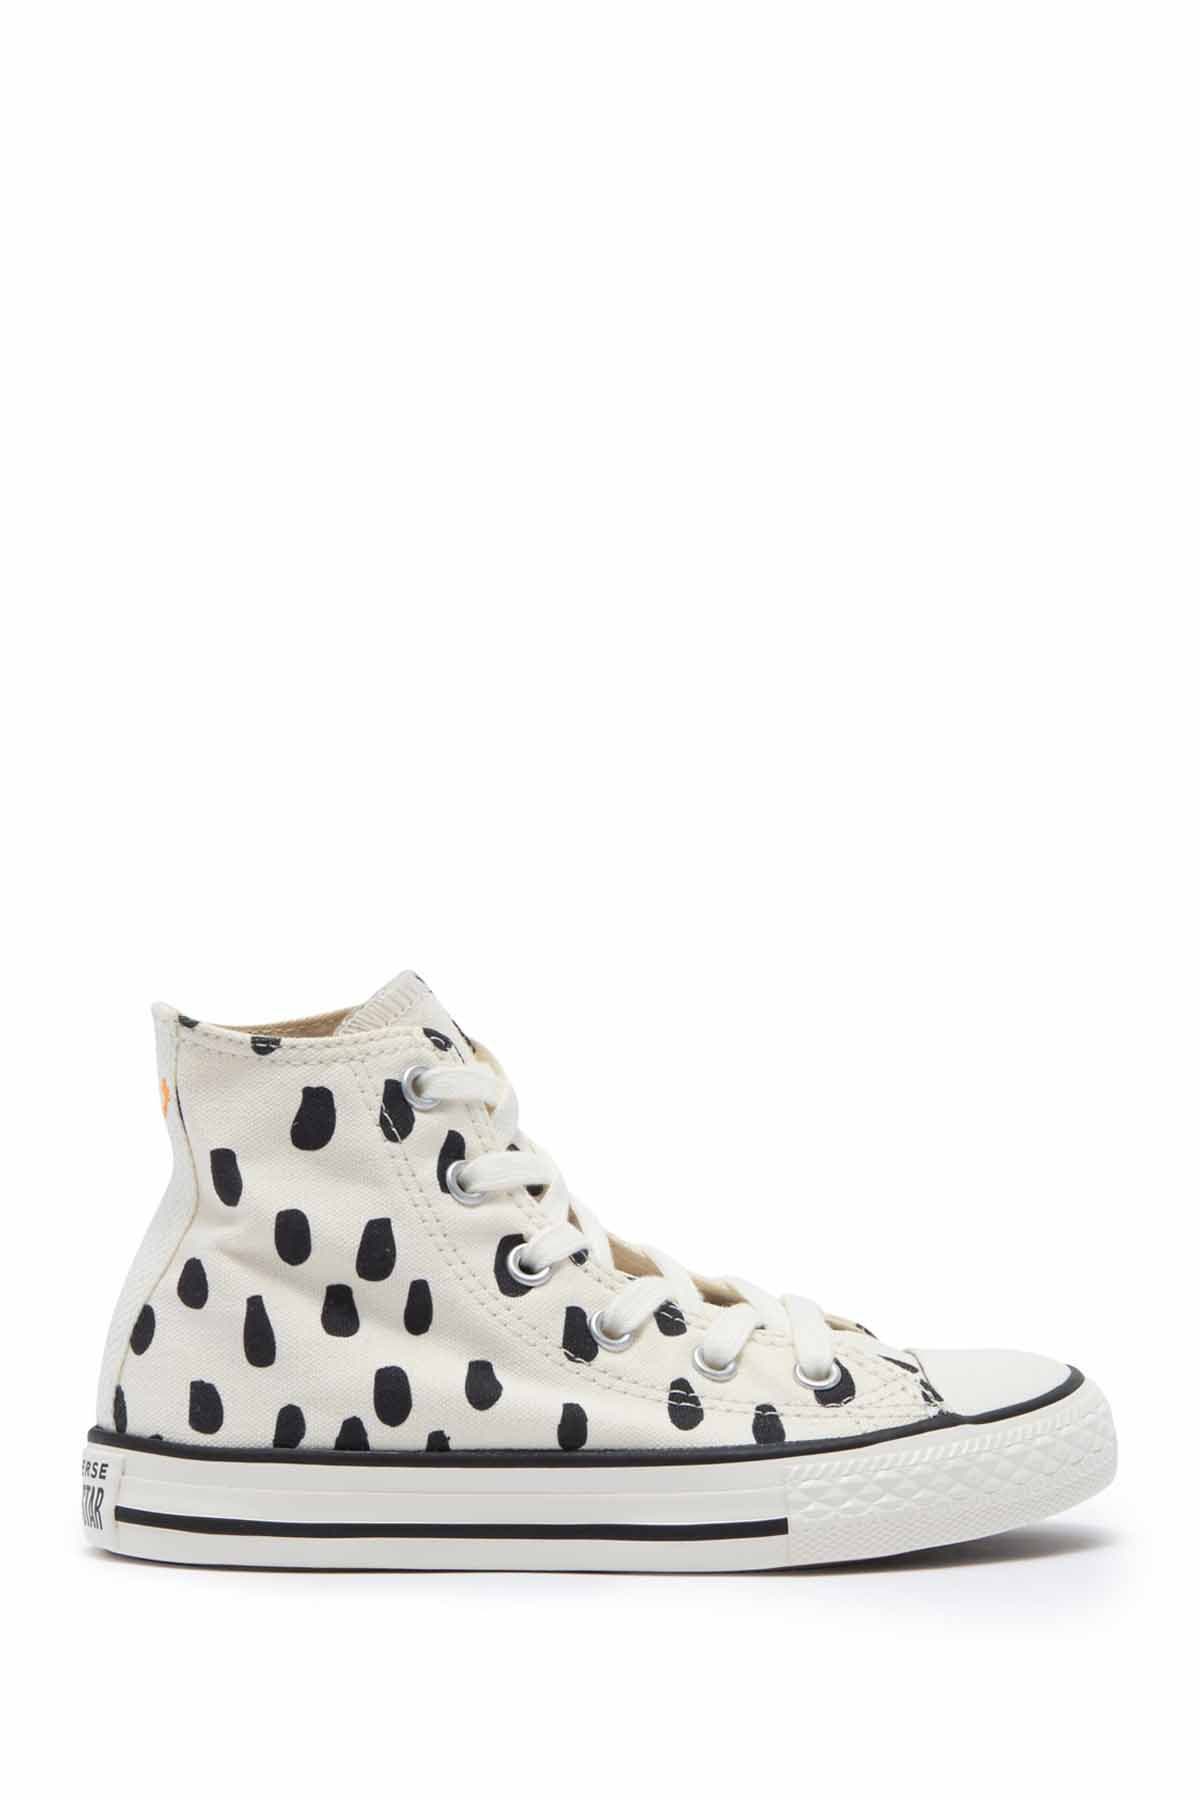 patterned high top converse